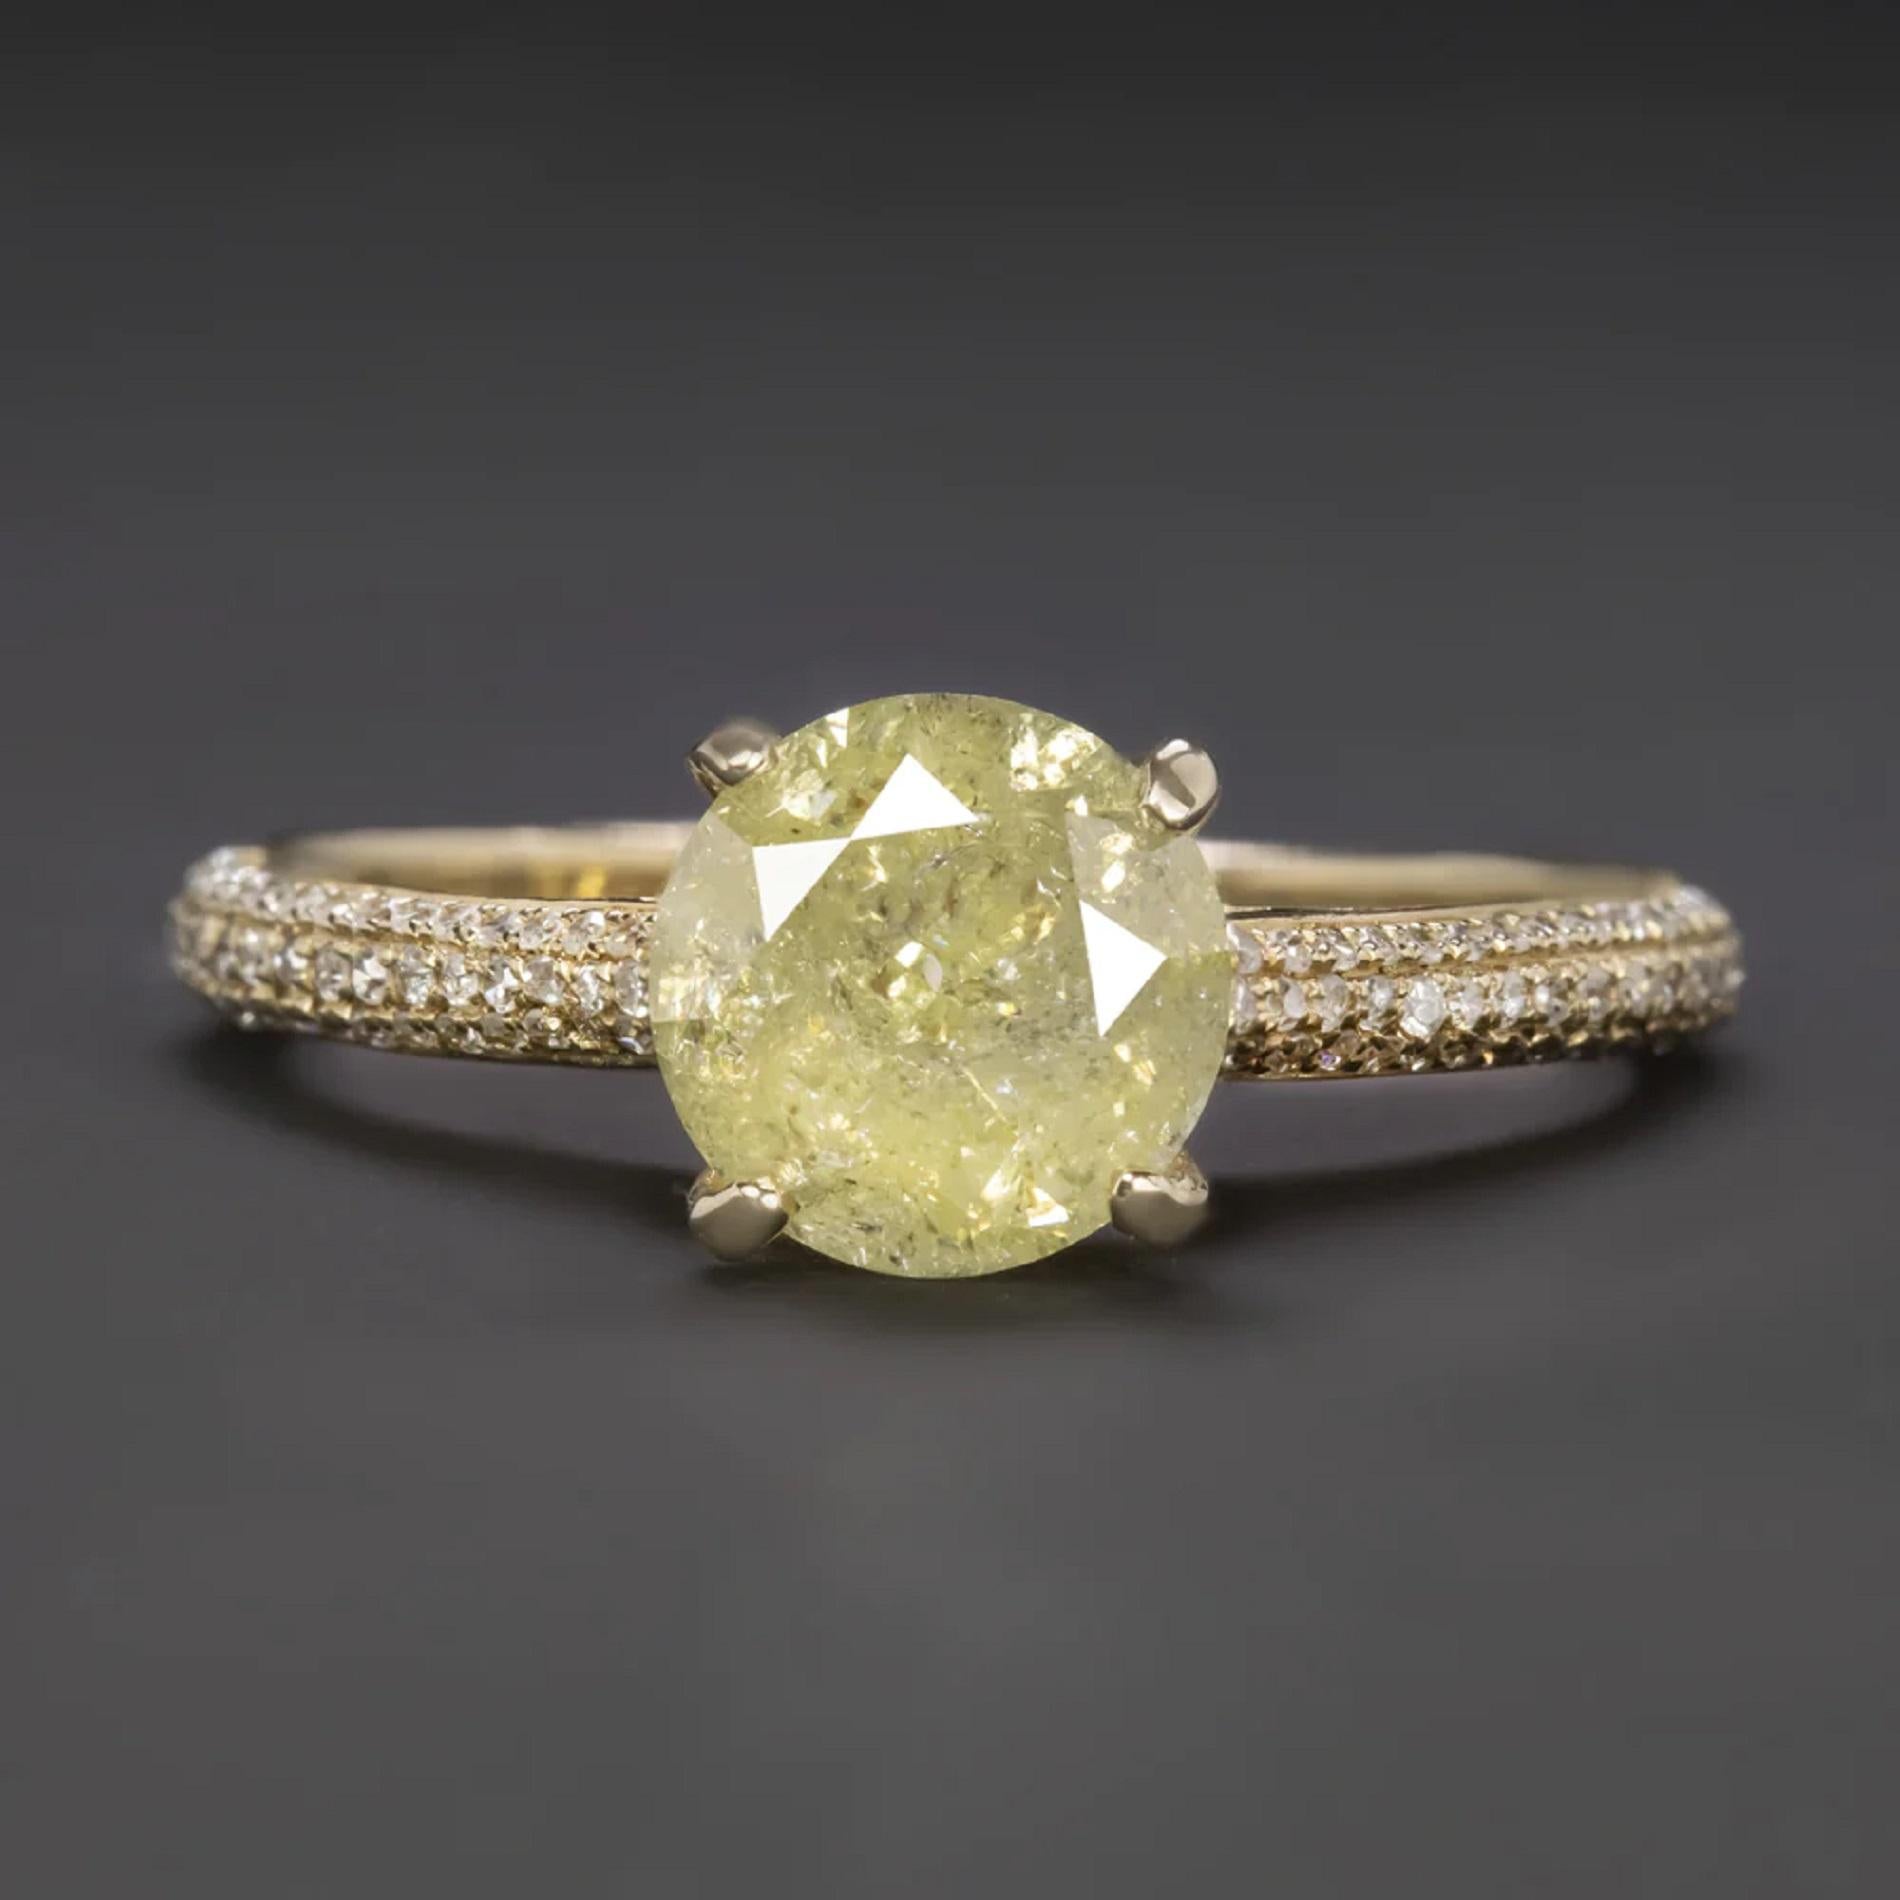 paired with a luxurious diamond encrusted setting!

Highlights:

- Substantial 1.60ct natural diamond center

- Lovely fancy light yellow color.

- White inclusions create a unique rustic look!

- 0.70ct of bright white and vibrant accent diamonds